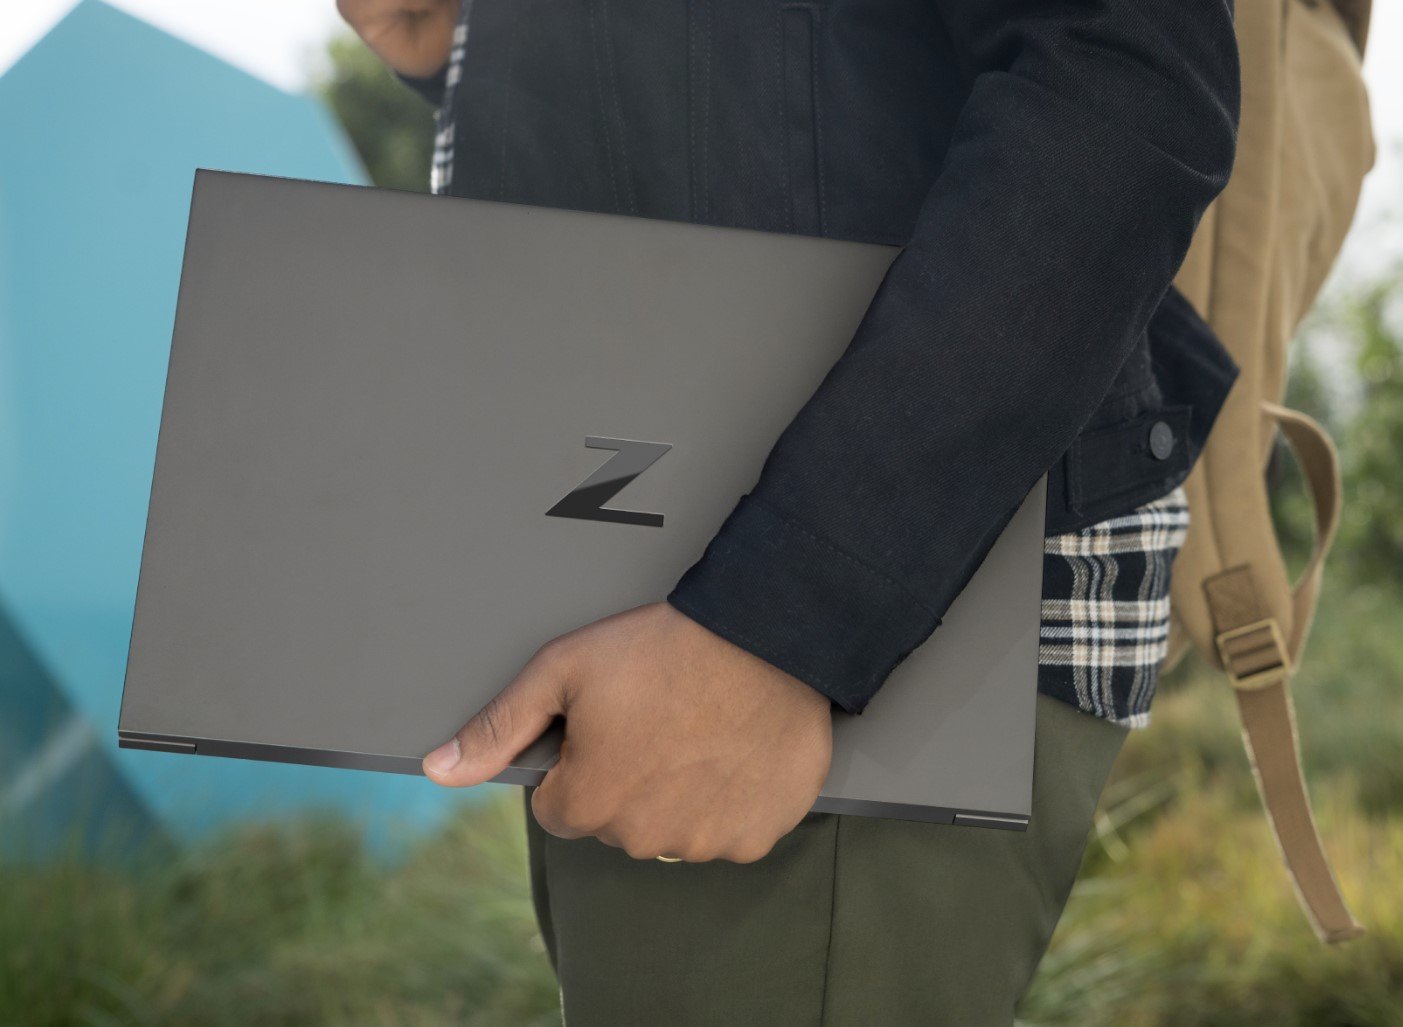 New HP Envy 15 is a MacBook Pro killer for $1000 less